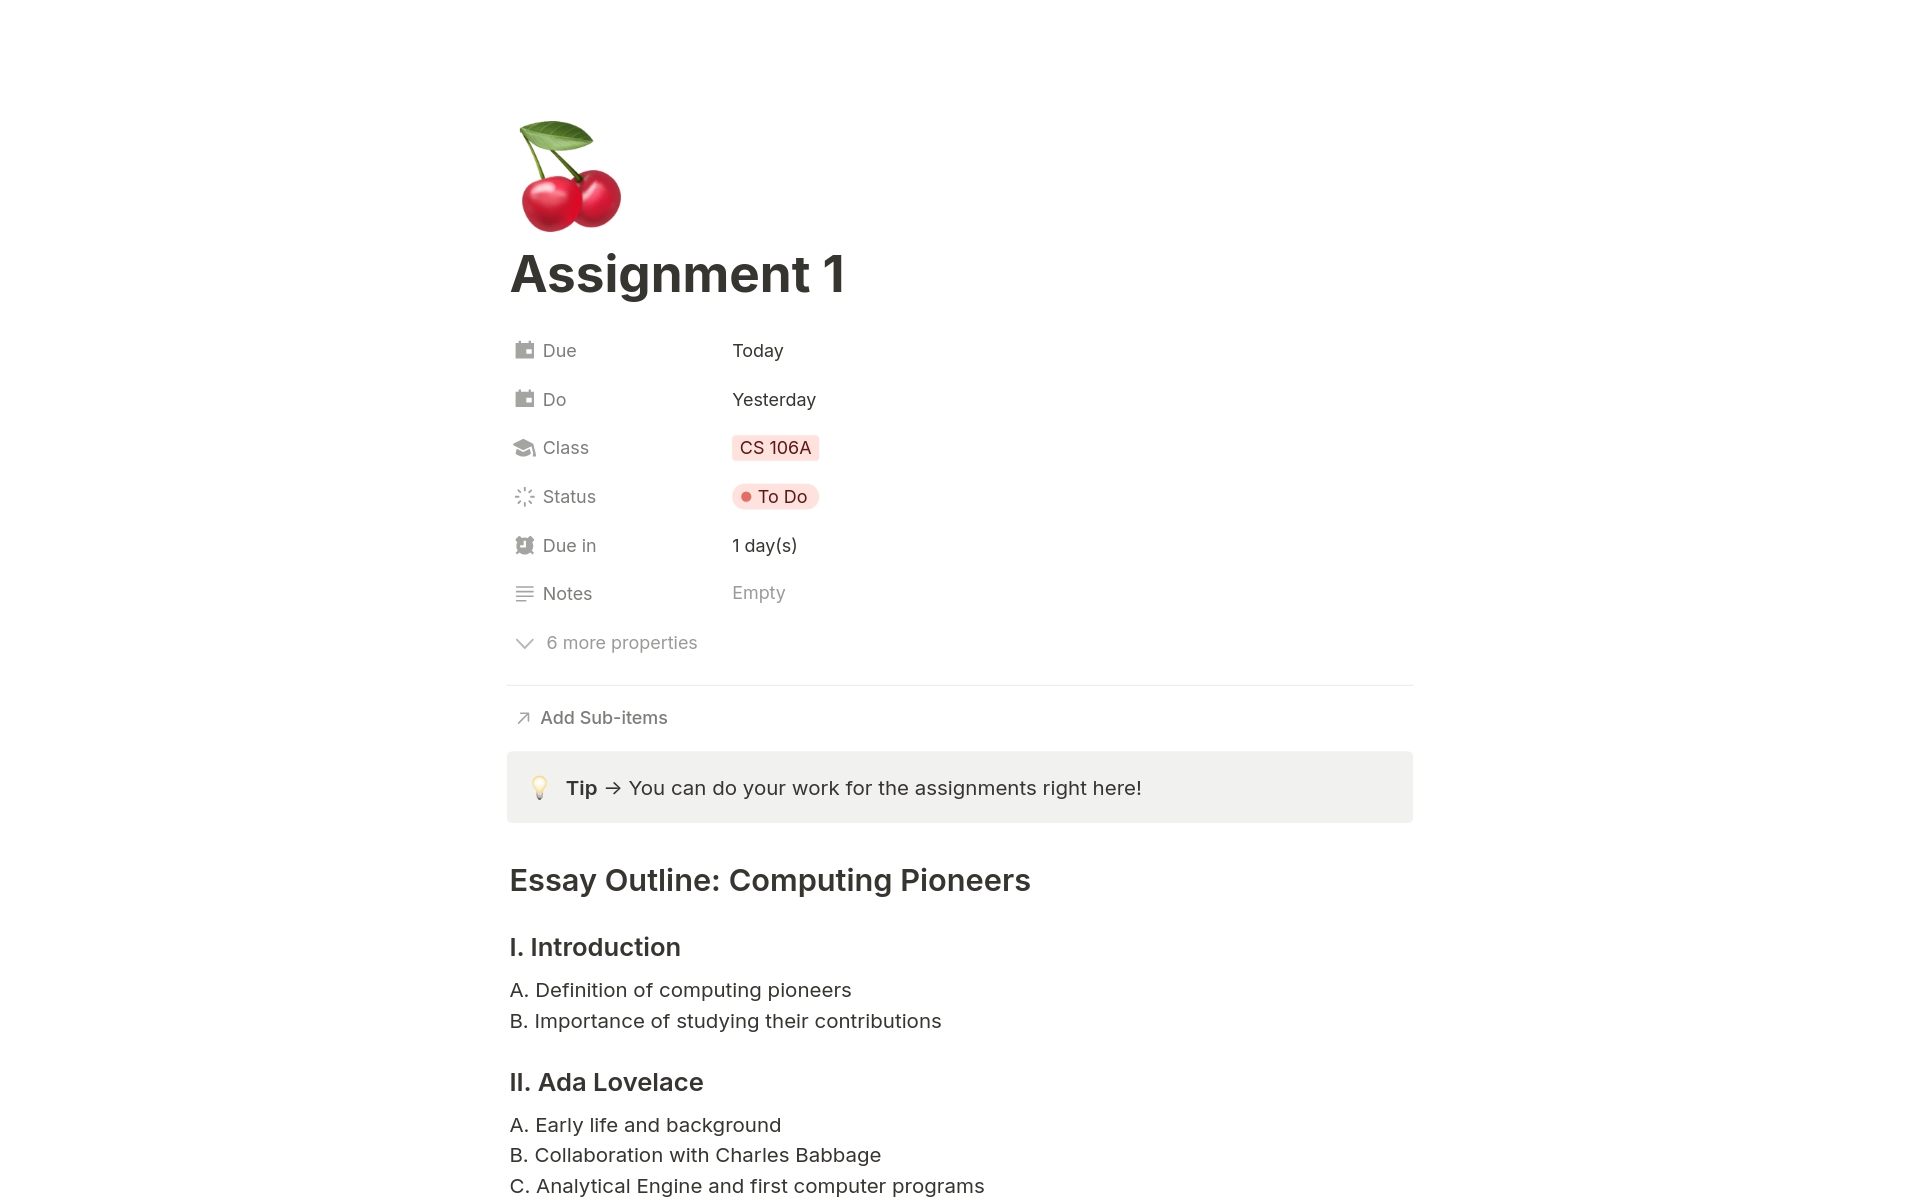 An all-in-one assignment tracker for students! Using the power of Notion formulas, this template automatically arranges the assignments due first at the top, and organizes the “done” assignments so that the most recent one you’ve completed is also easy to access.